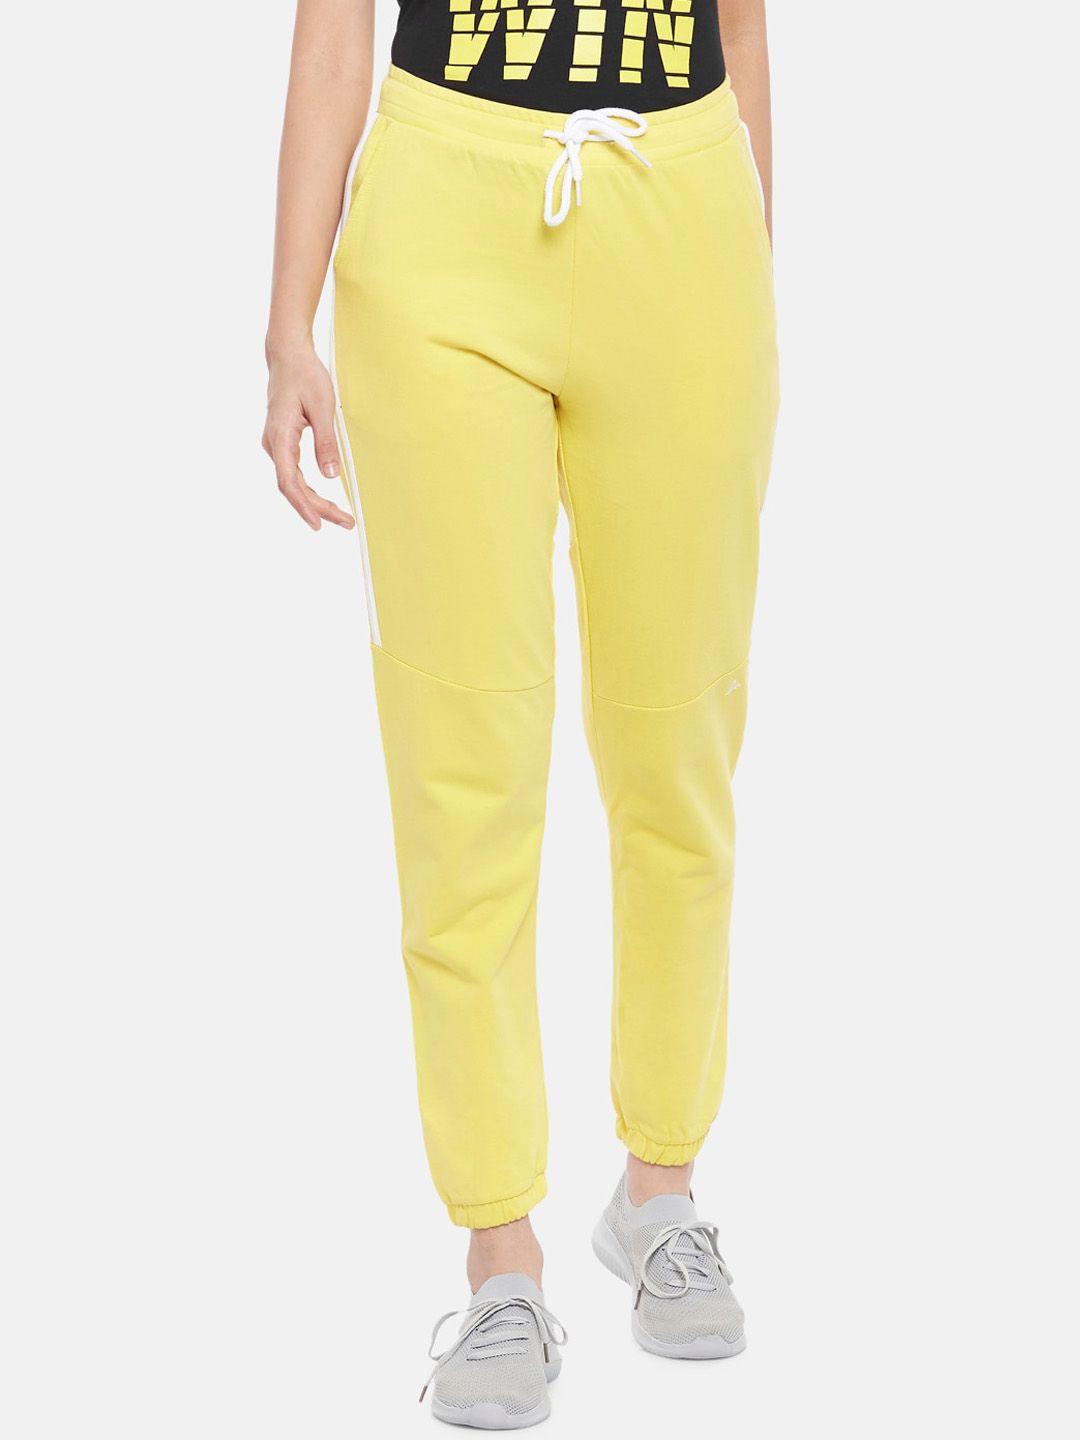 ajile-by-pantaloons-women-yellow-solid-pure-cotton-joggers